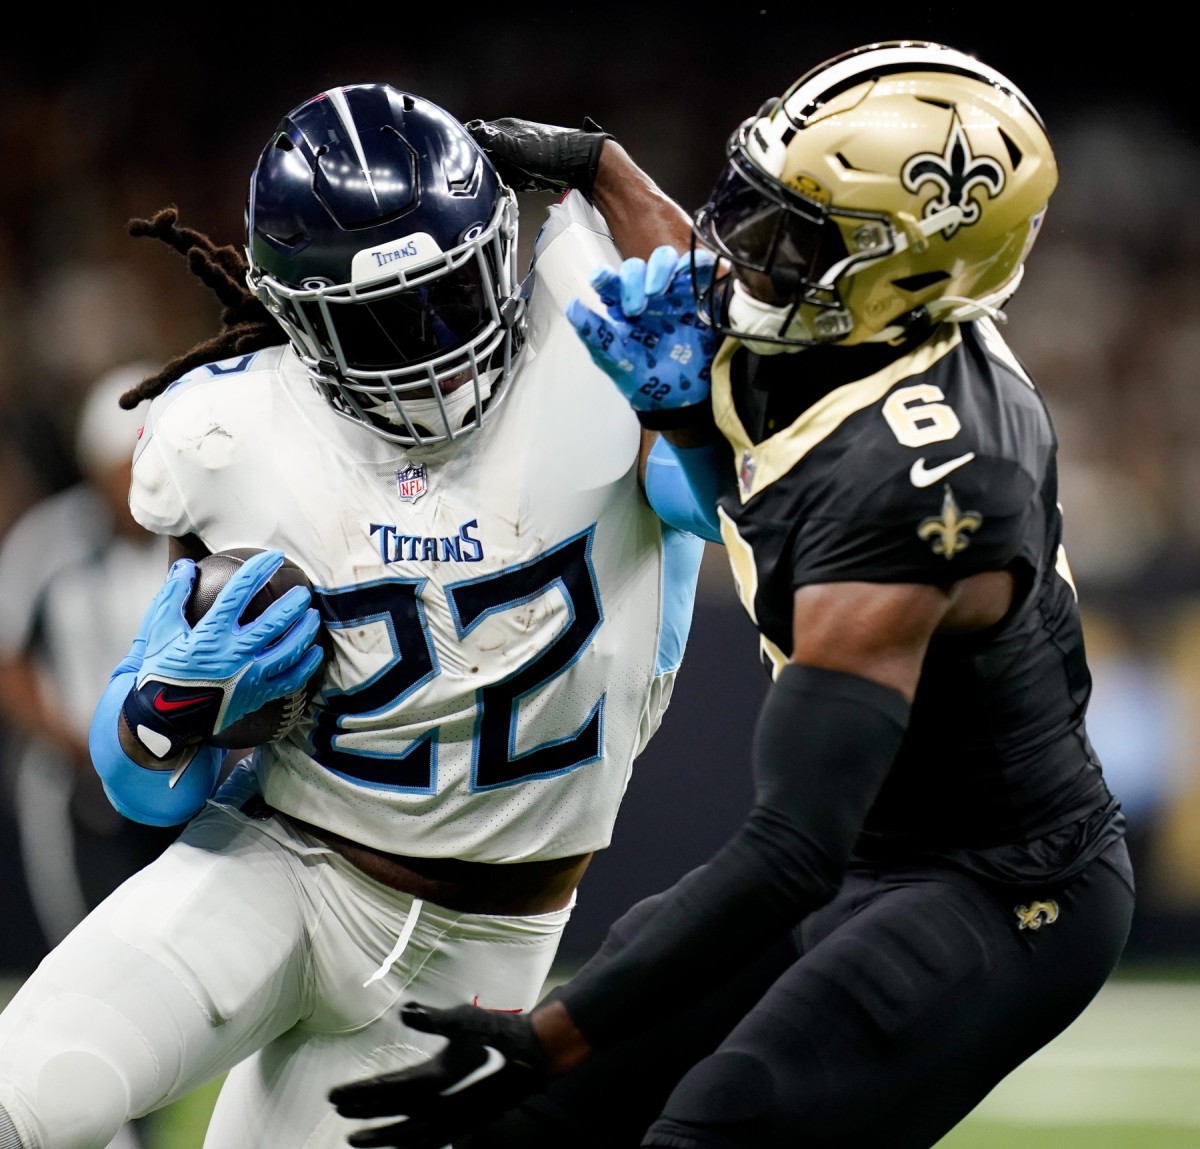 Derrick Henry (22) gets a first down as New Orleans Saints safety Marcus Maye (6) tries to stop him in the first quarter at the Caesars Superdome.